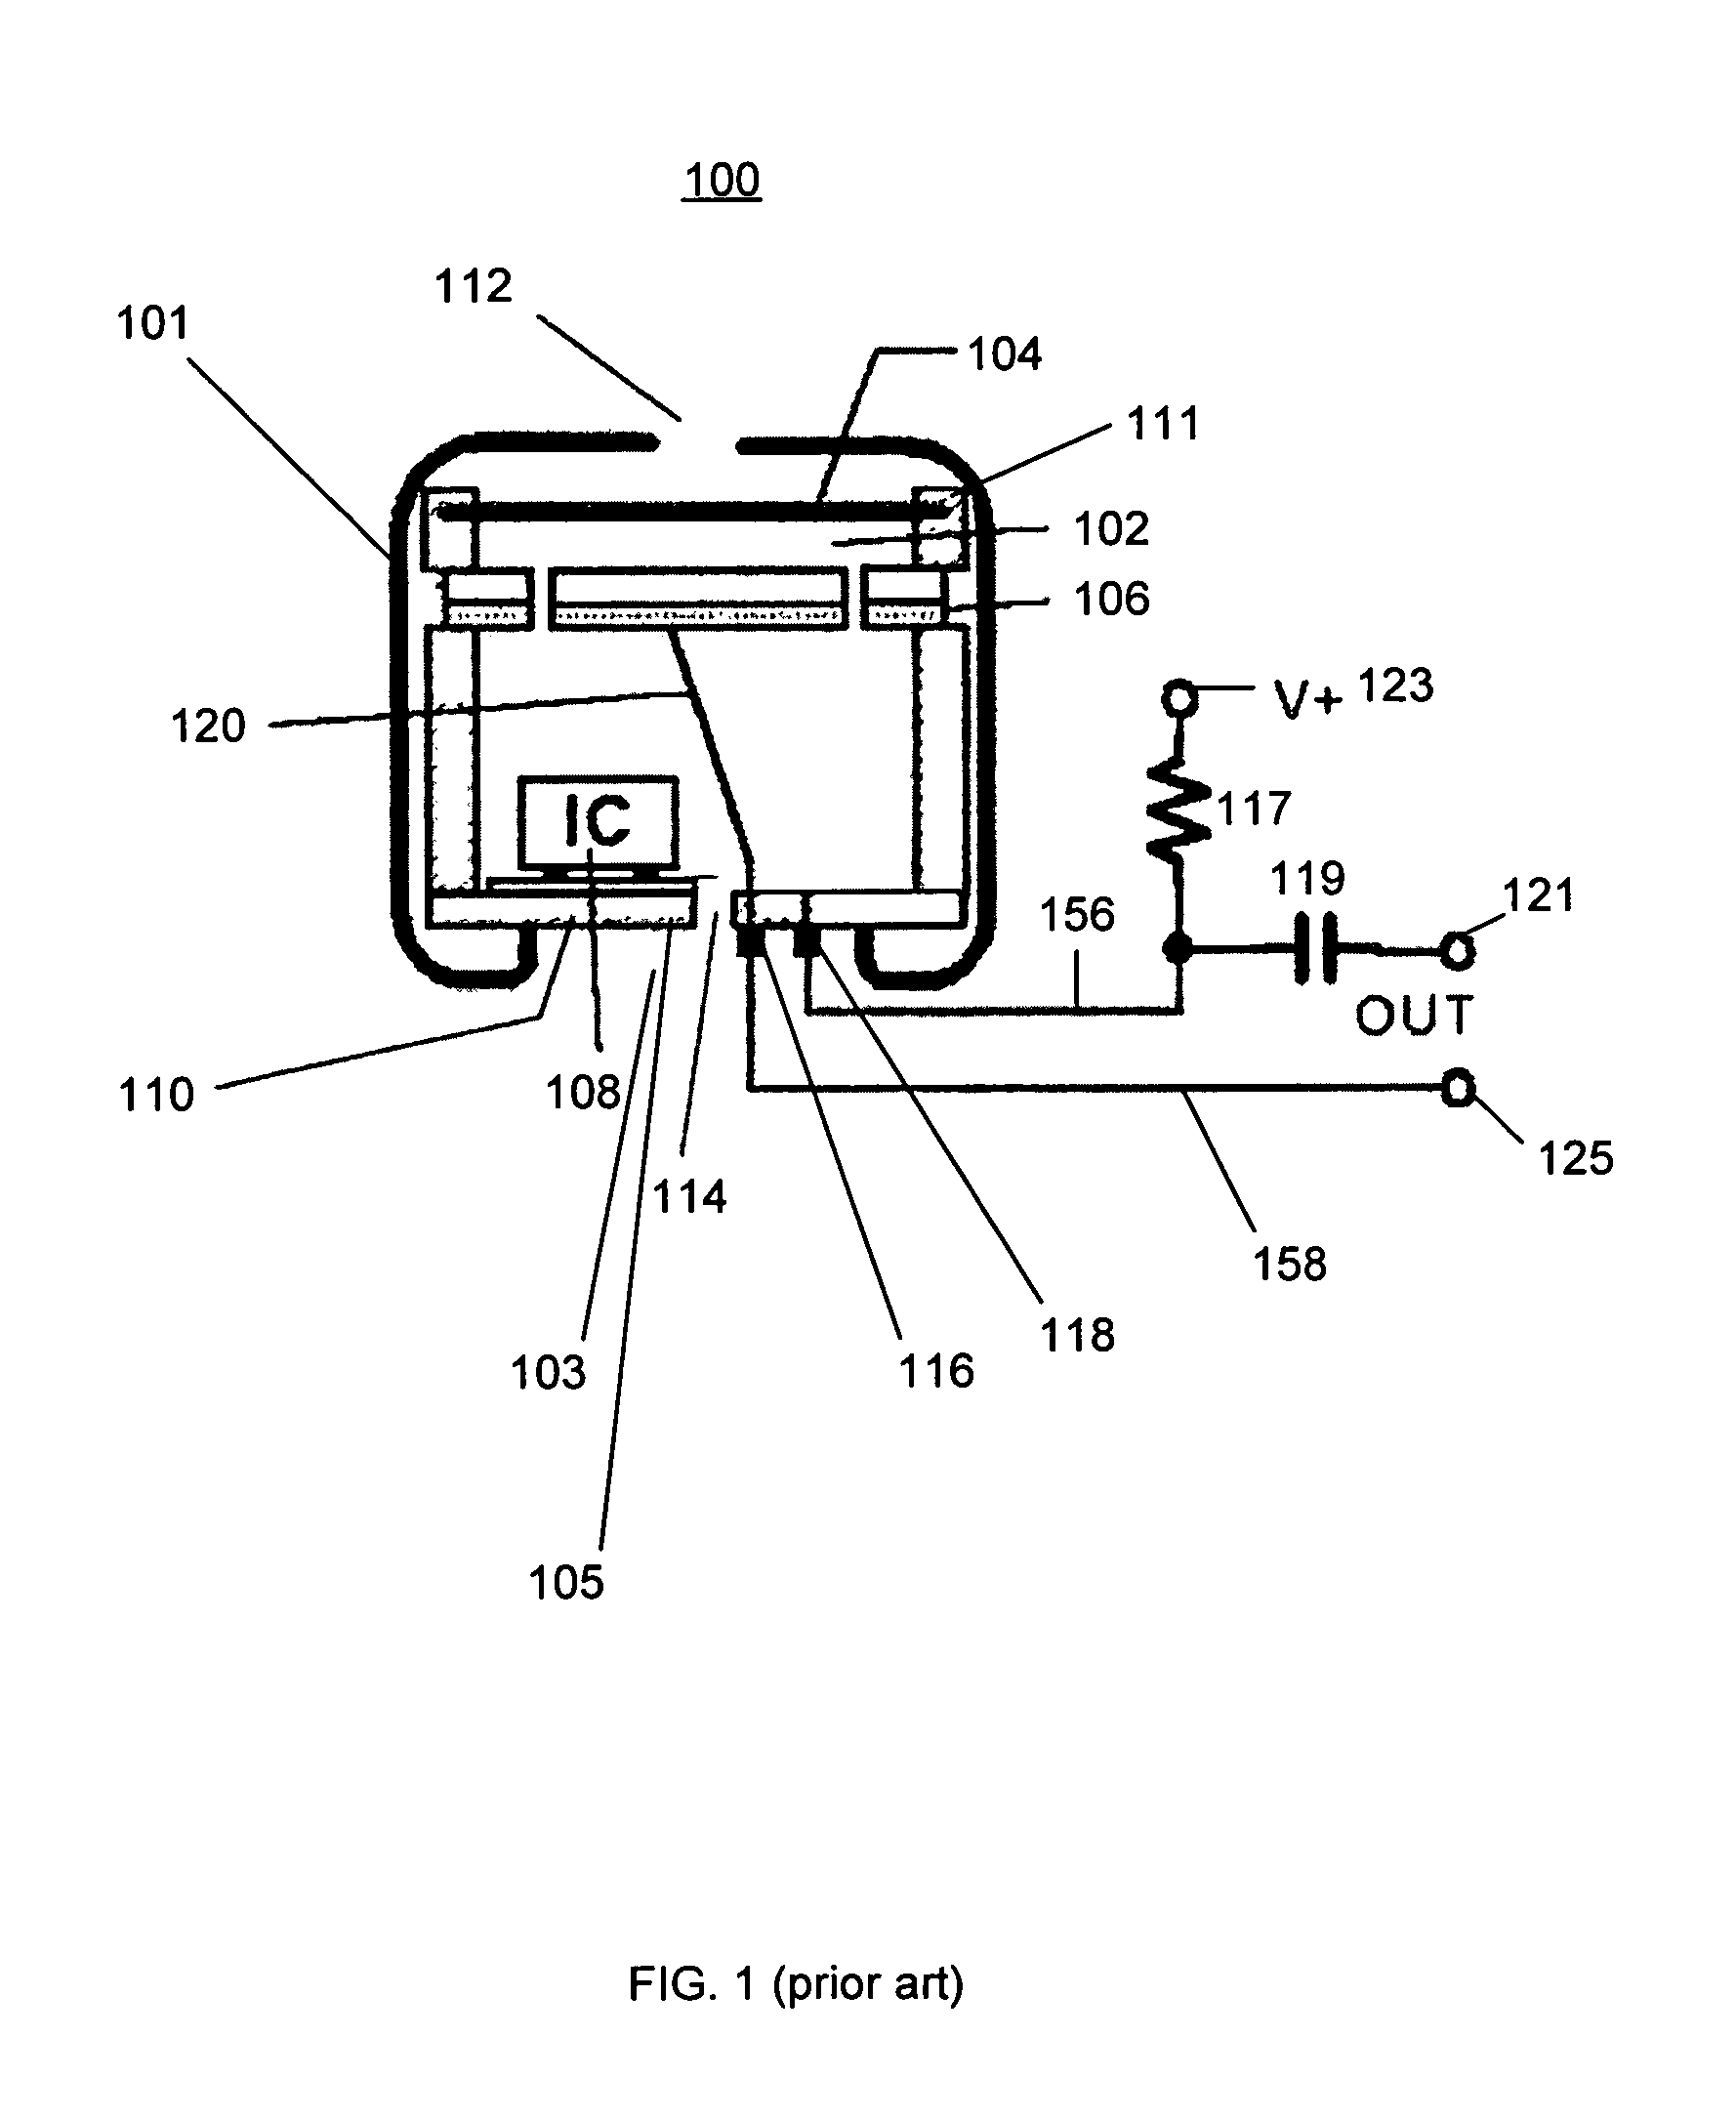 Noise cancelling microphone with reduced acoustic leakage